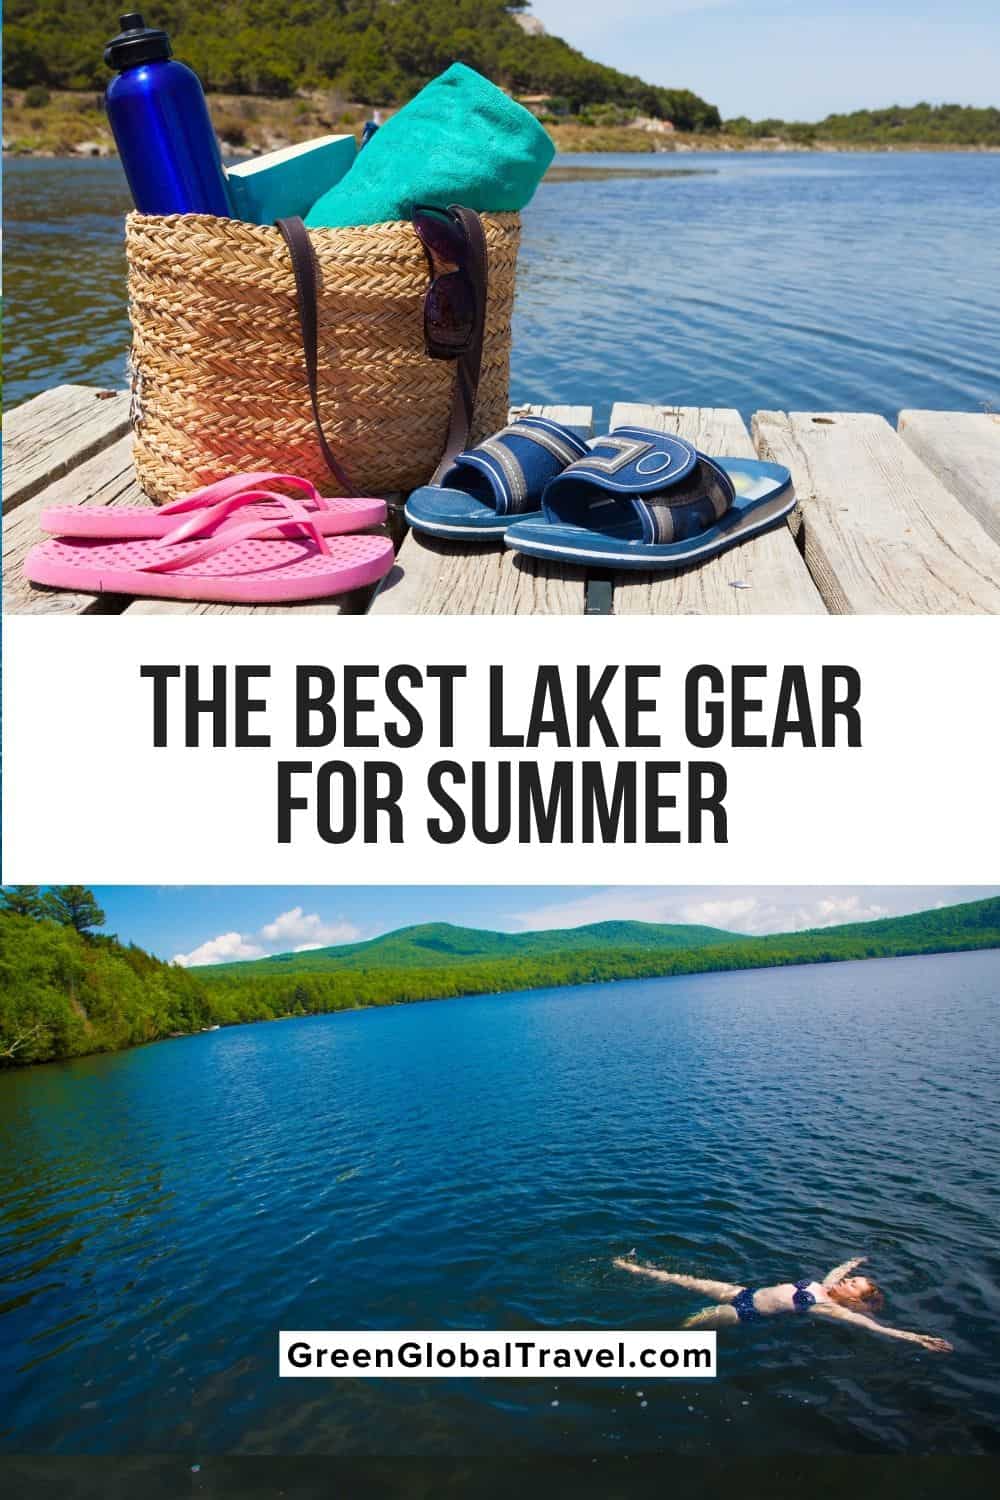 The Best Lake Day Gear & Accessories for Your Summer Outing includes Swimwear, Clothing, Floats, Sunglasses, Shoes, Camping/Cooking Gear, and Tech